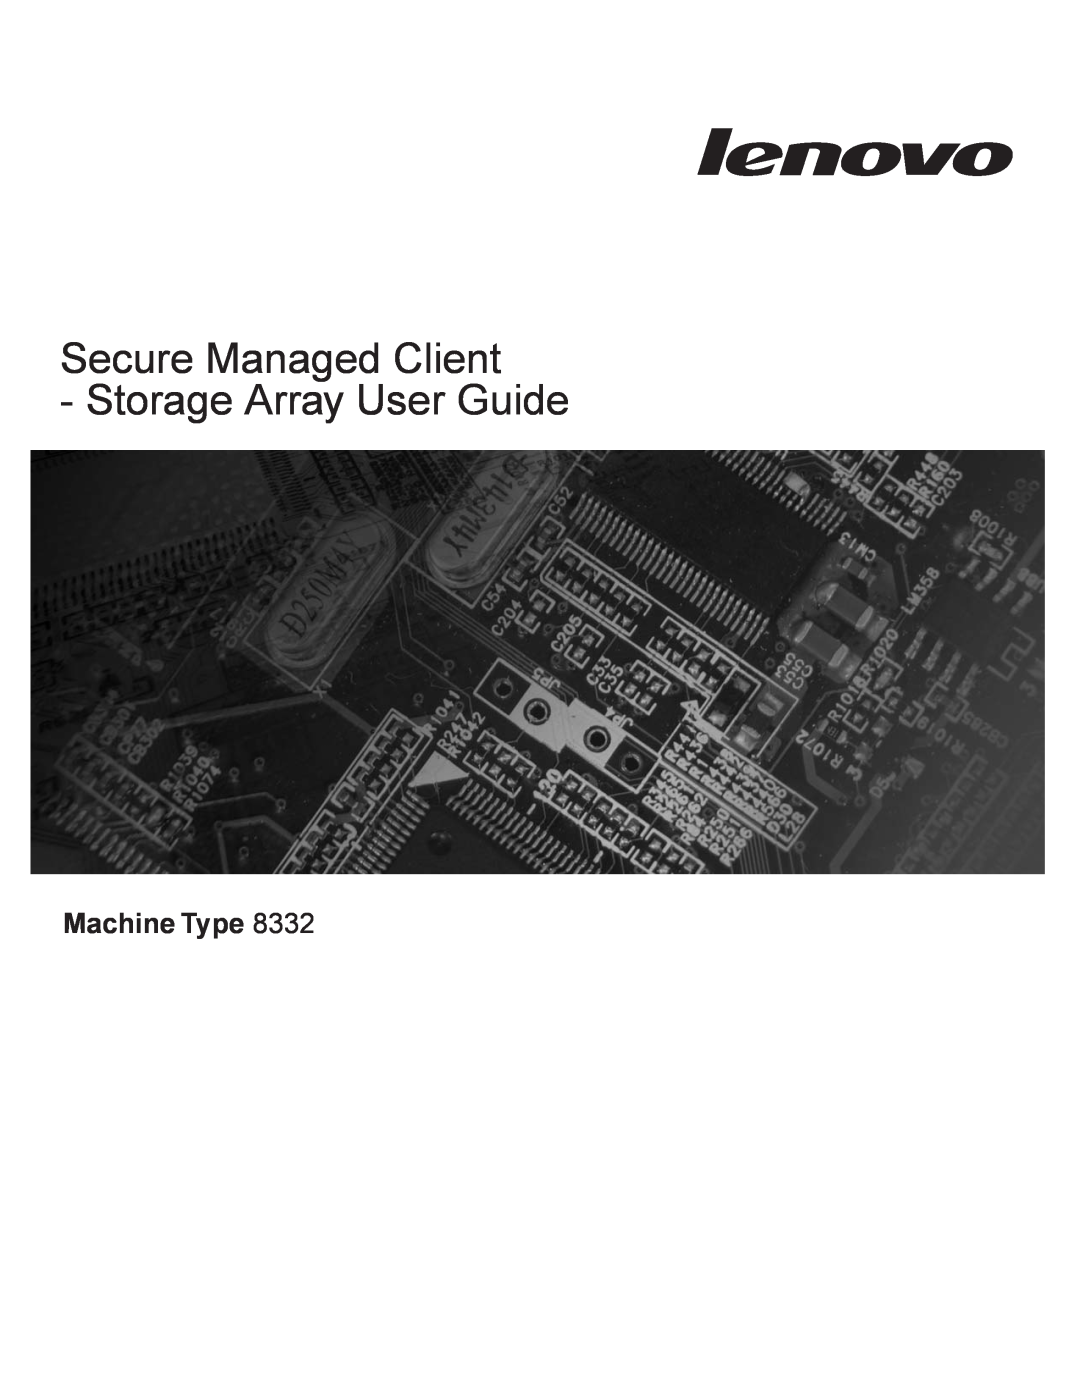 Lenovo 8332 manual Machine Type, Secure Managed Client Storage Array User Guide 